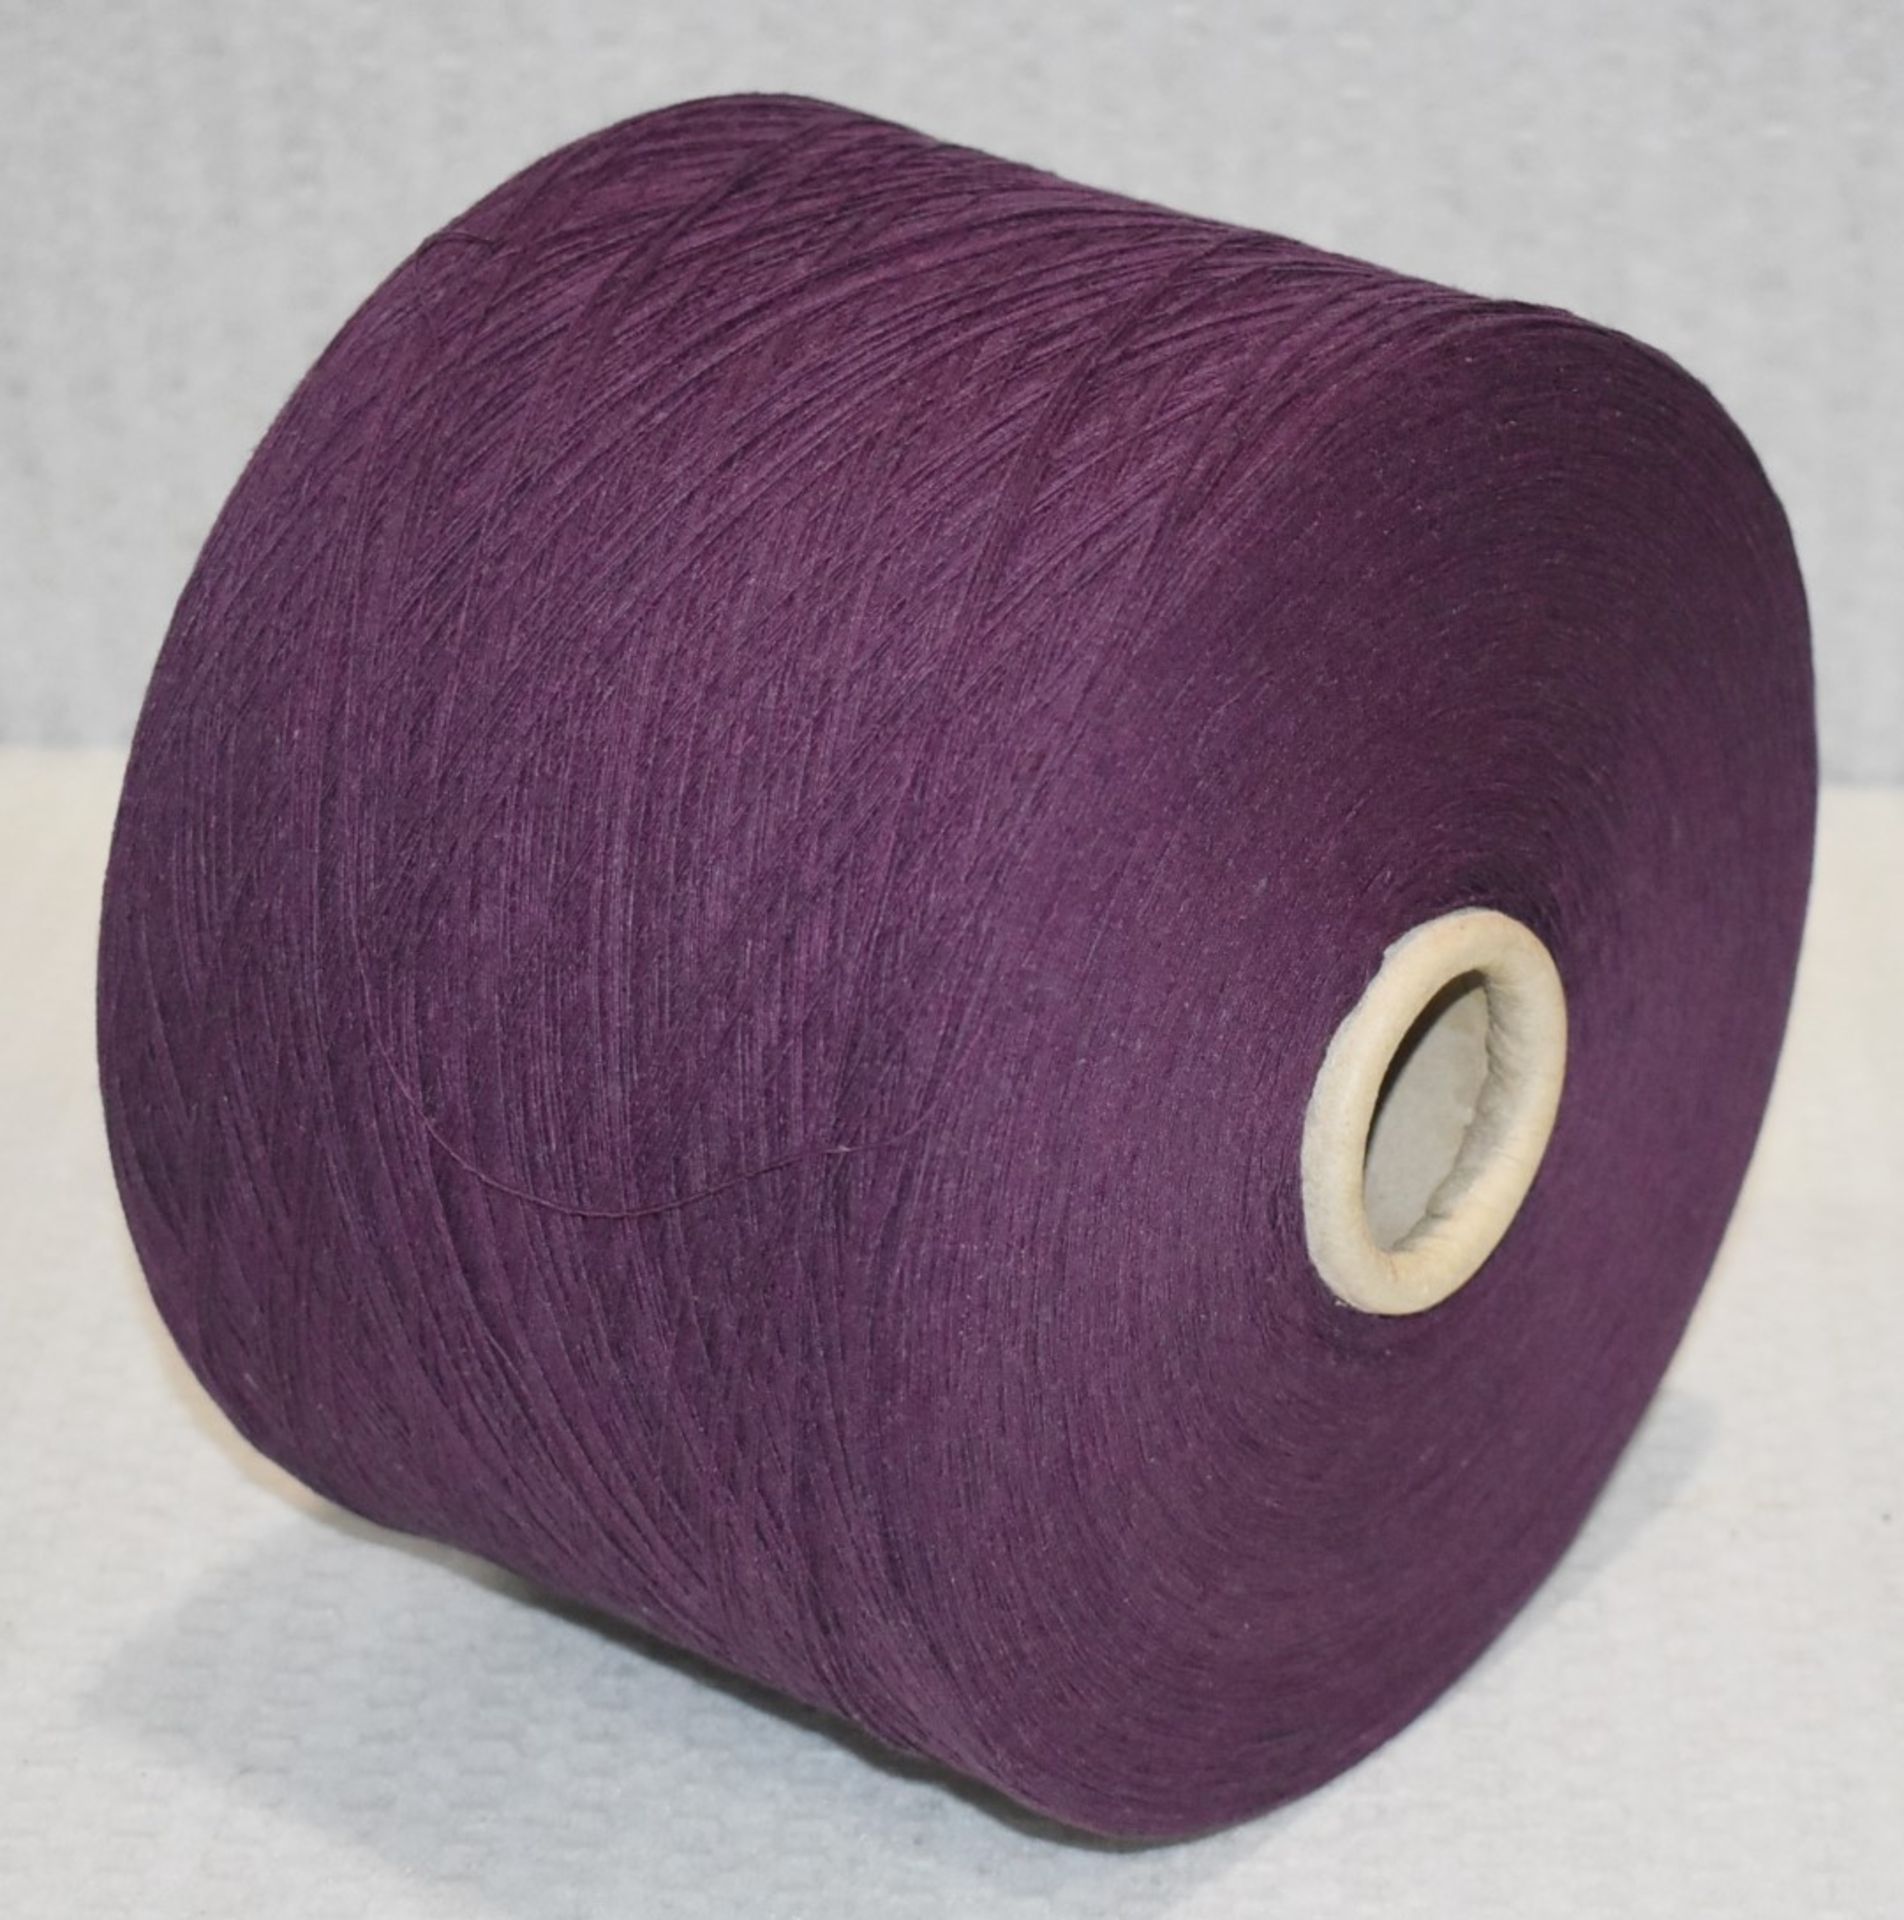 6 x Cones of 1/13 MicroCotton Knitting Yarn - Colour: Purple - Approx Weight: 2,300g - New Stock - Image 5 of 9